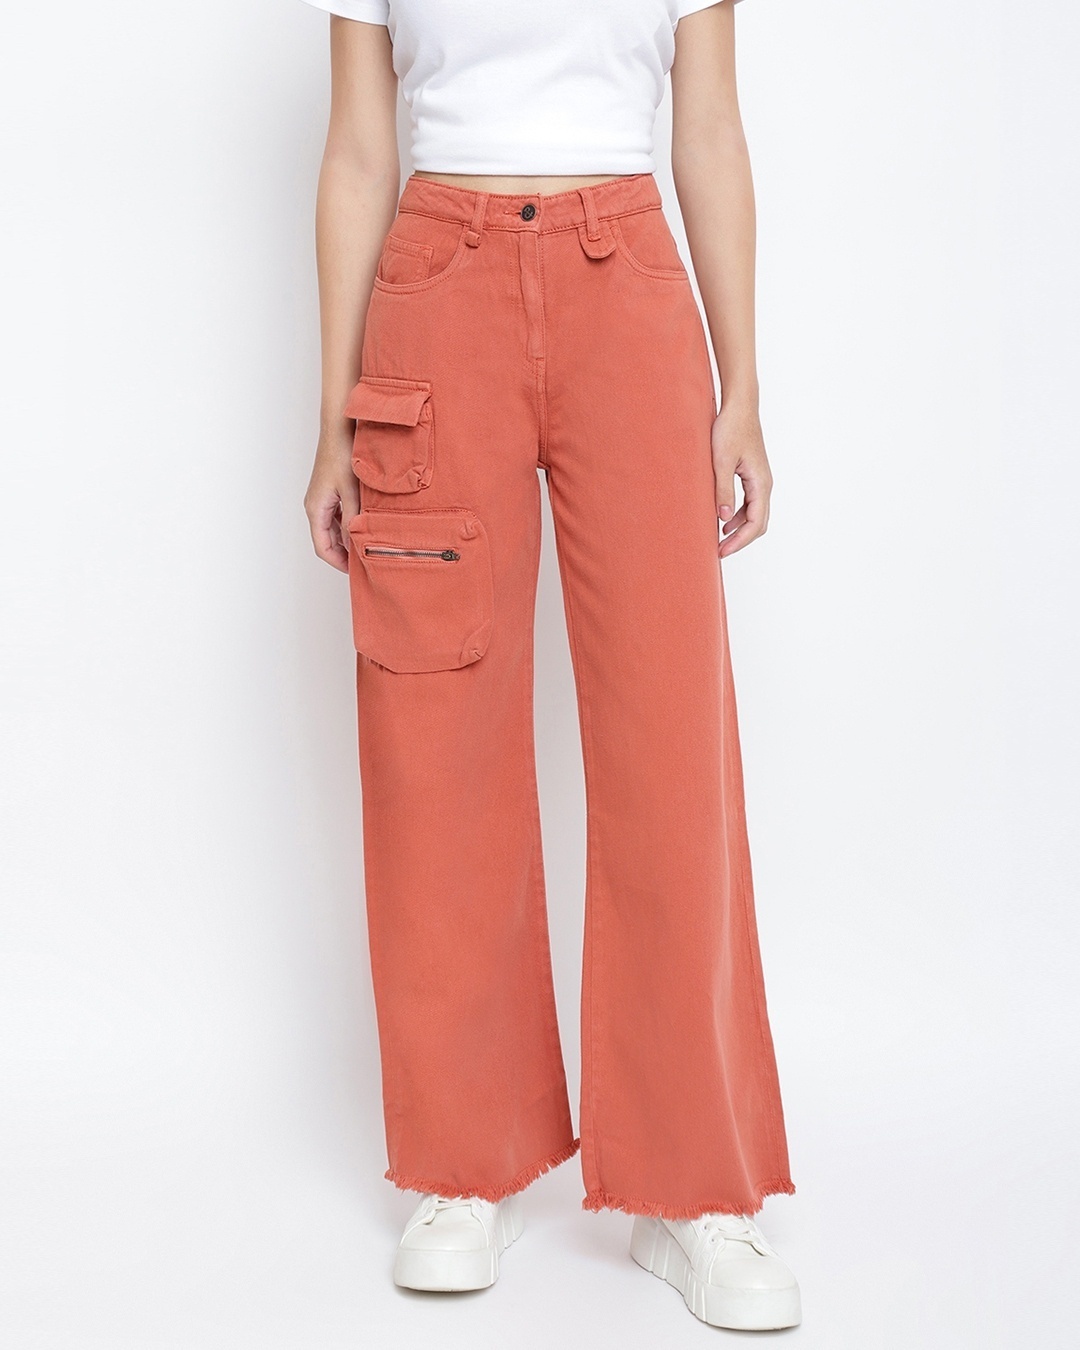 Buy Women's Red Flared Cargo Trousers Online at Bewakoof